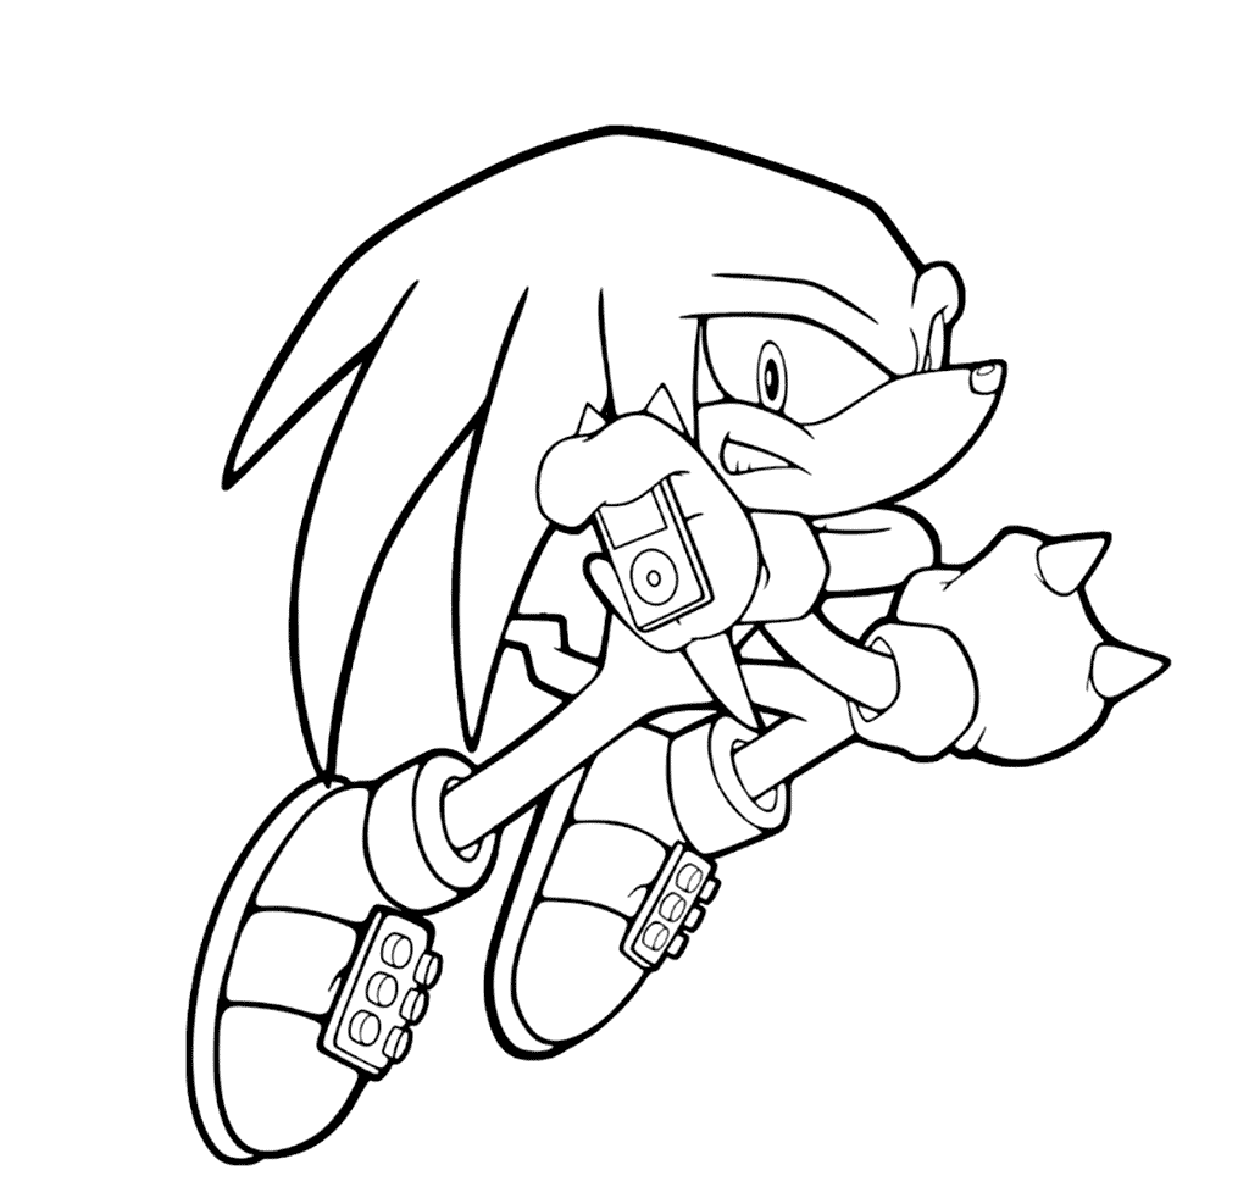 Sonic Knuckles Coloring Pages - SheetalColor.com